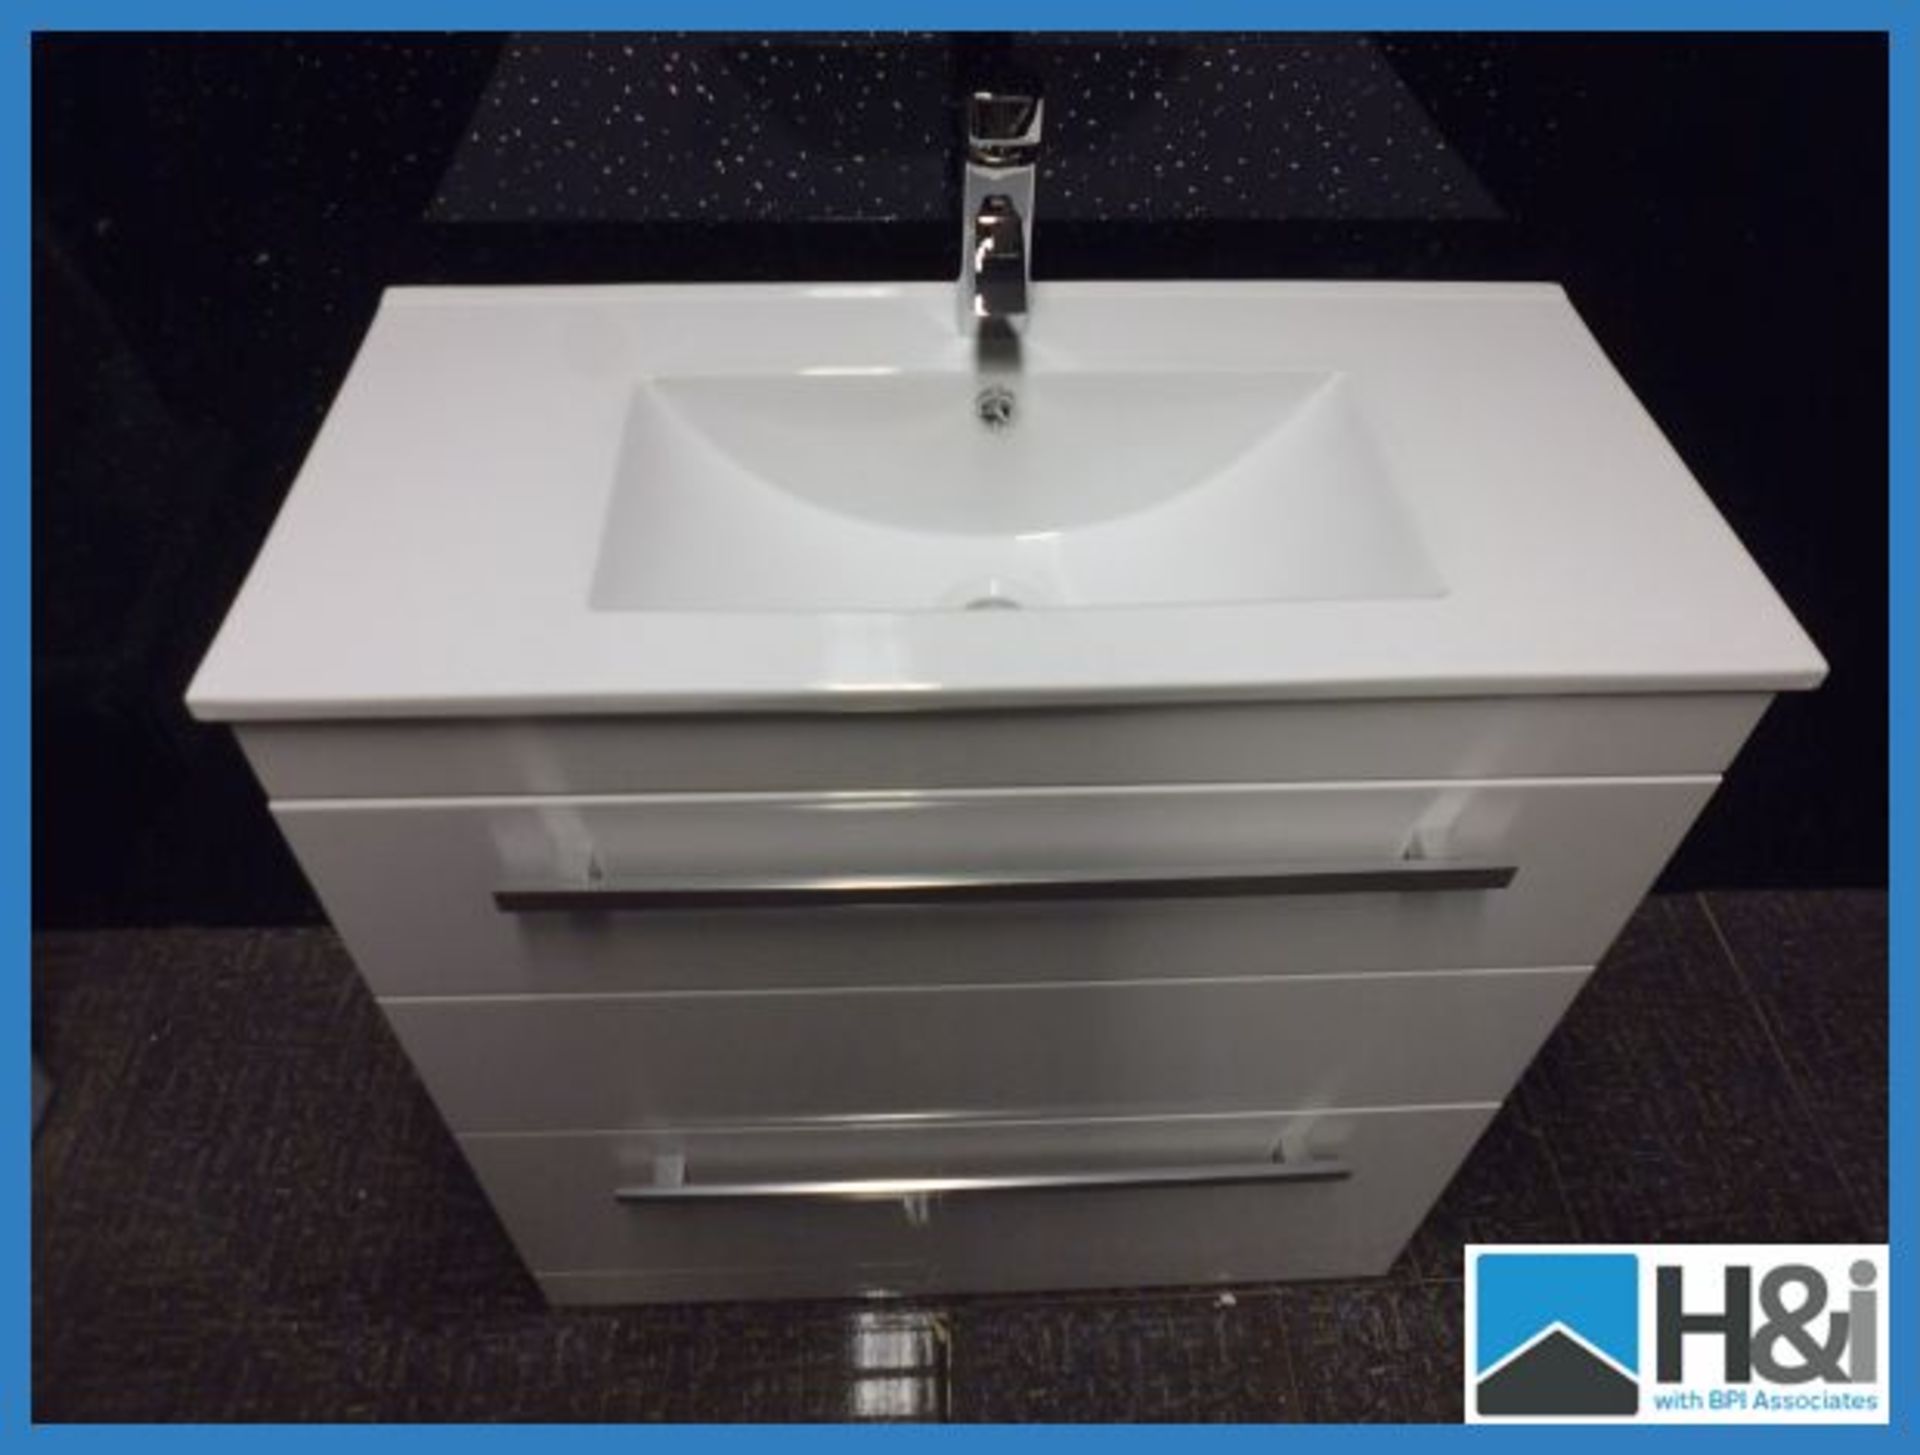 Designer Floor Mounted Minimalist Basin & Cabinet in Gloss White with 2 Soft Close Drawers. Comes - Image 2 of 5